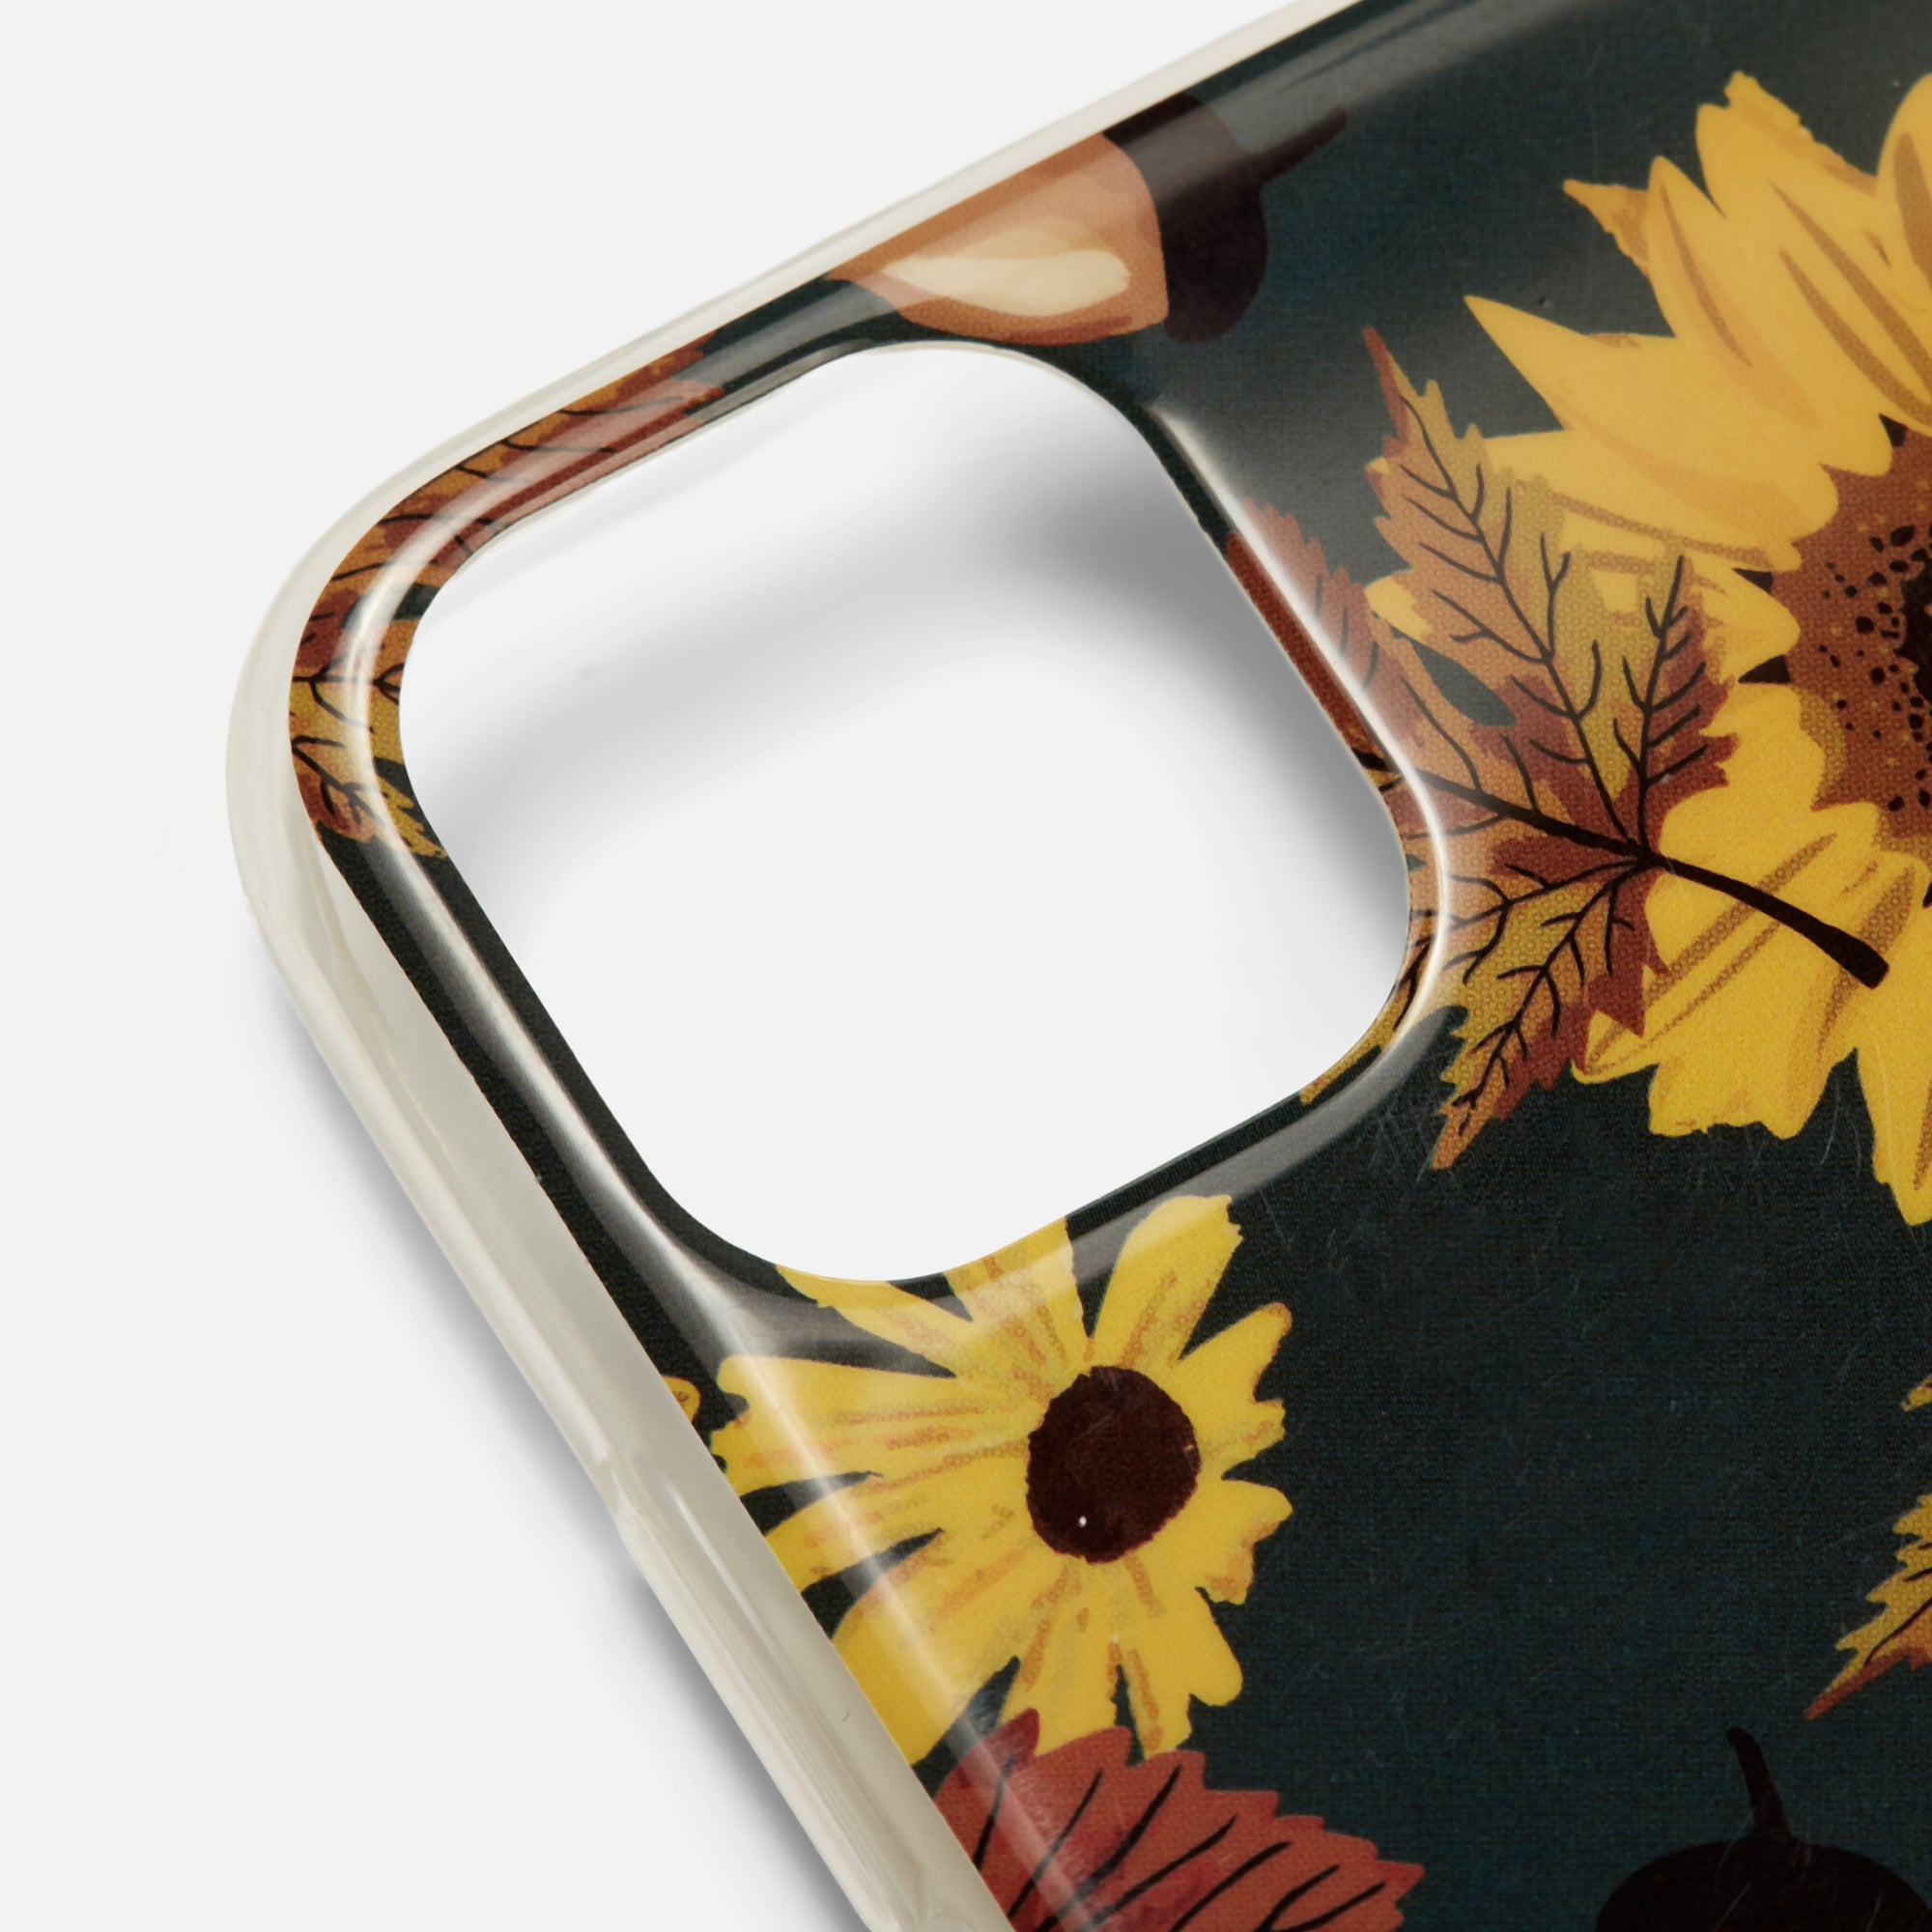 iPhone case with fall flowers